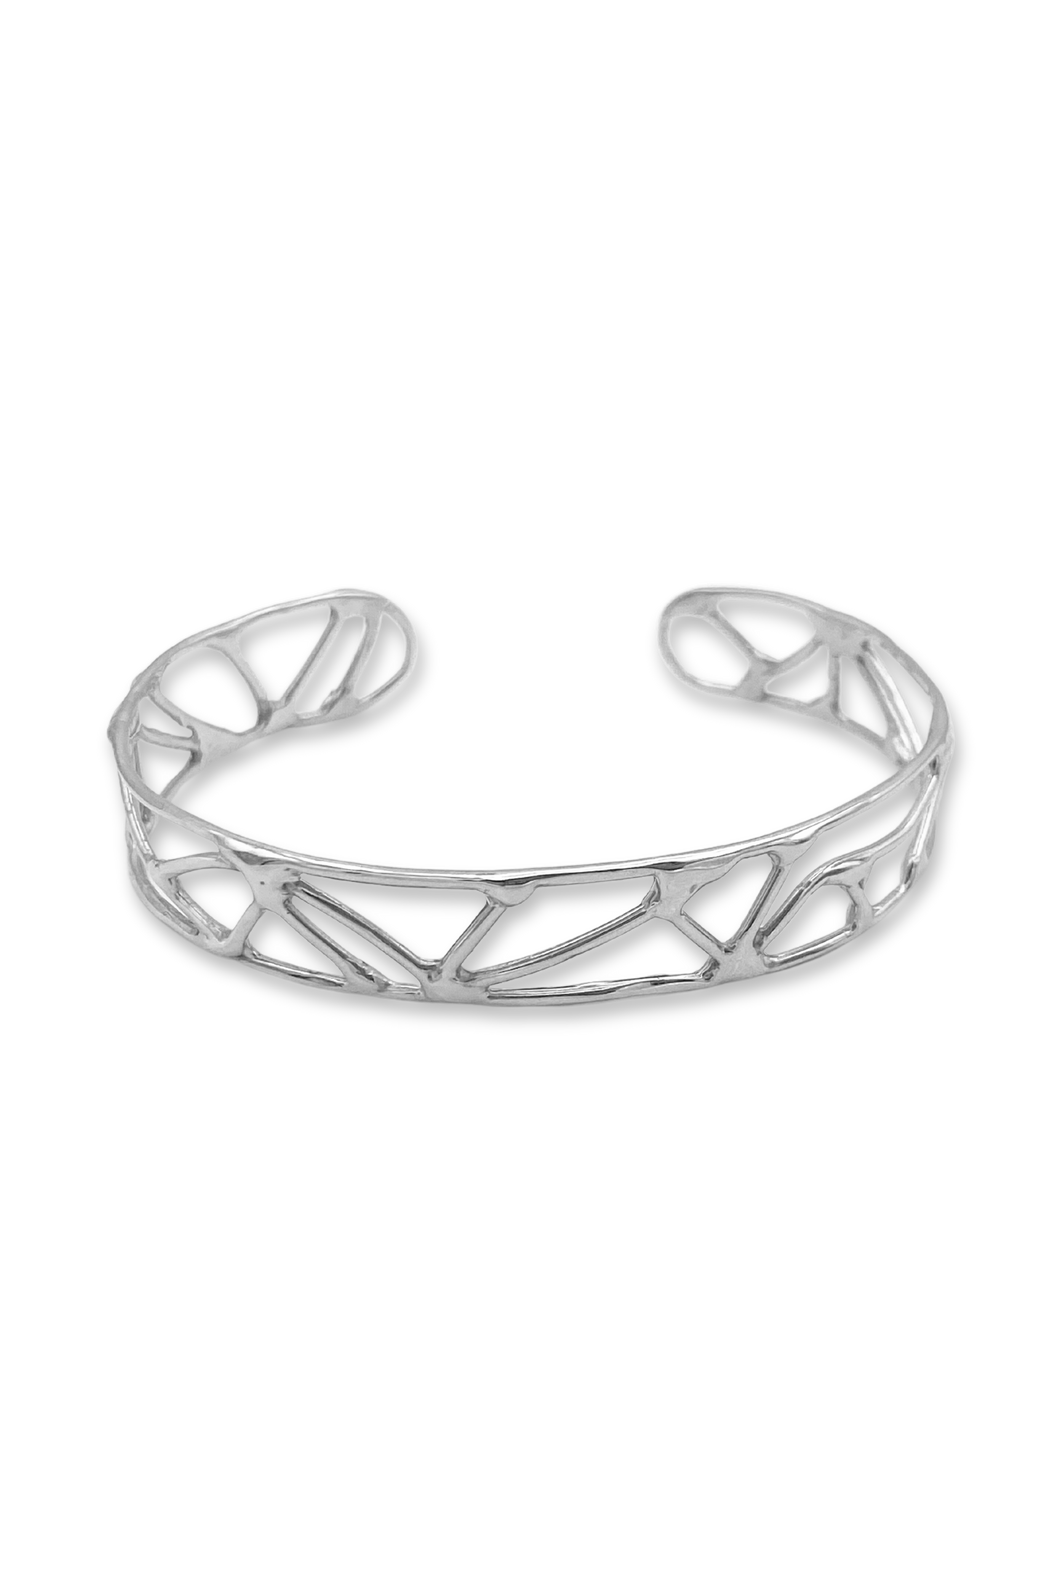 Courage Cuff Bracelet in Sterling Silver